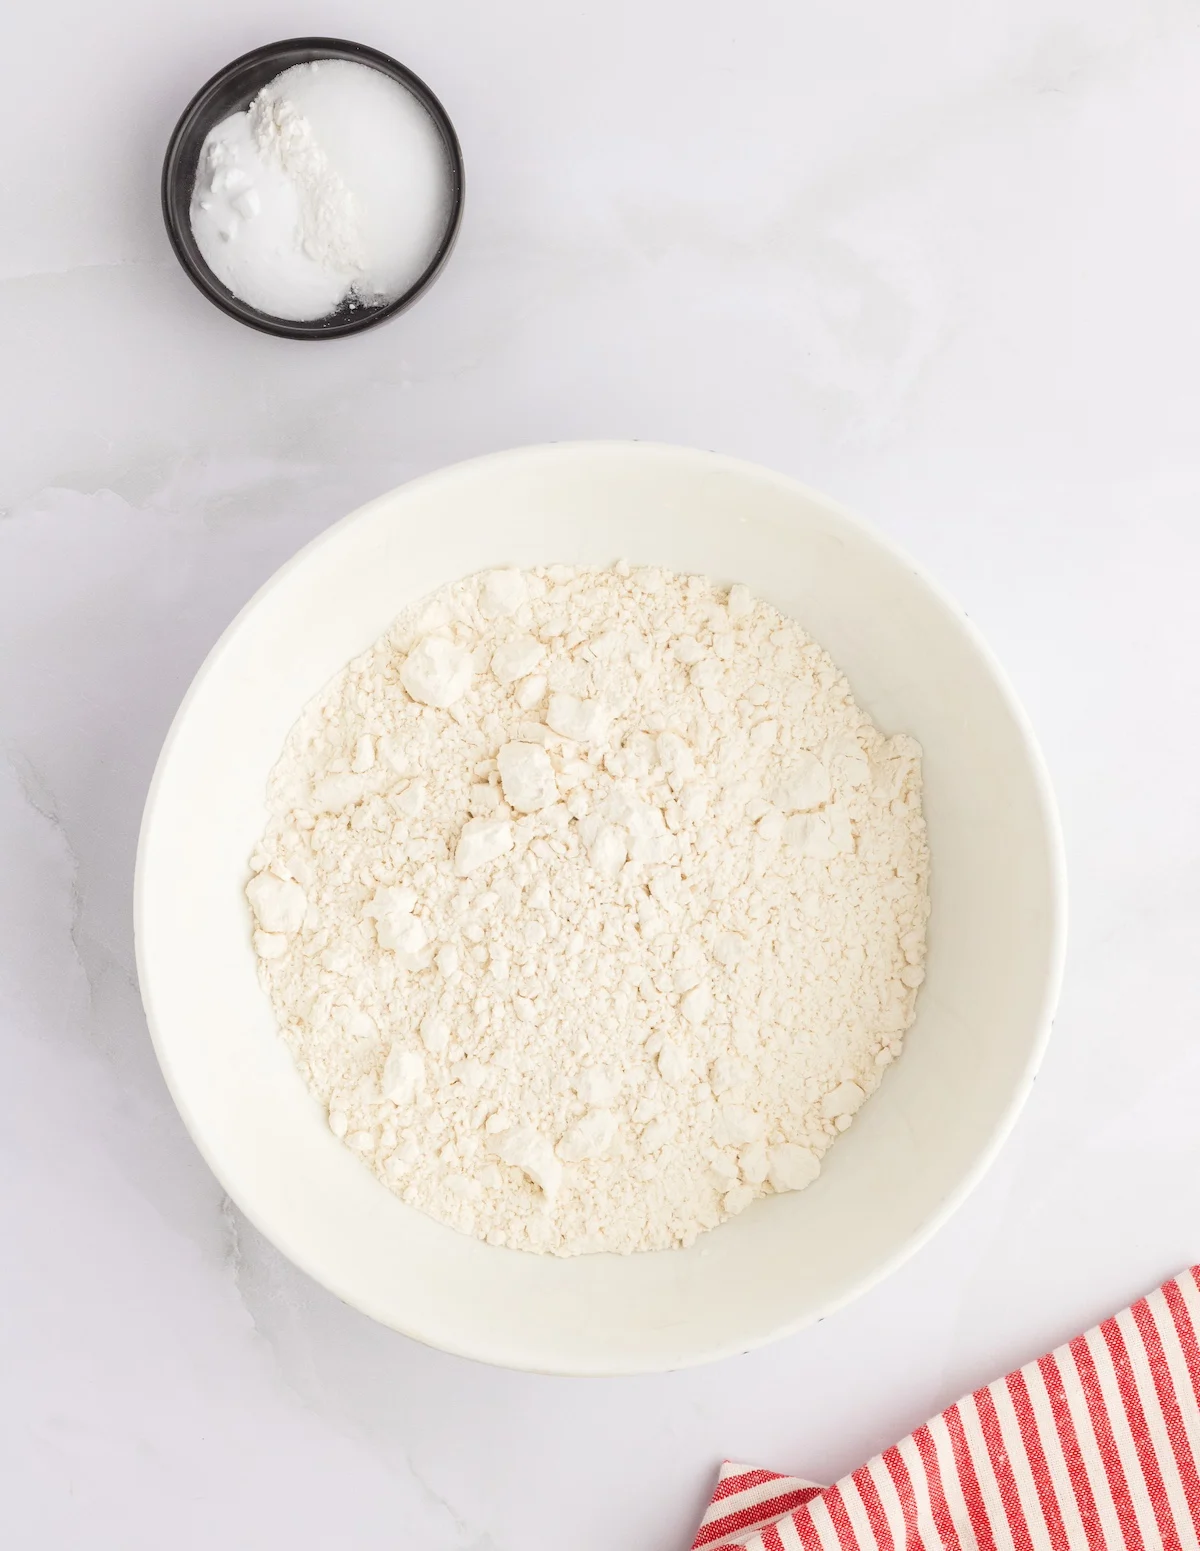 Flour in a large white bowl mixed with baking powder and salt